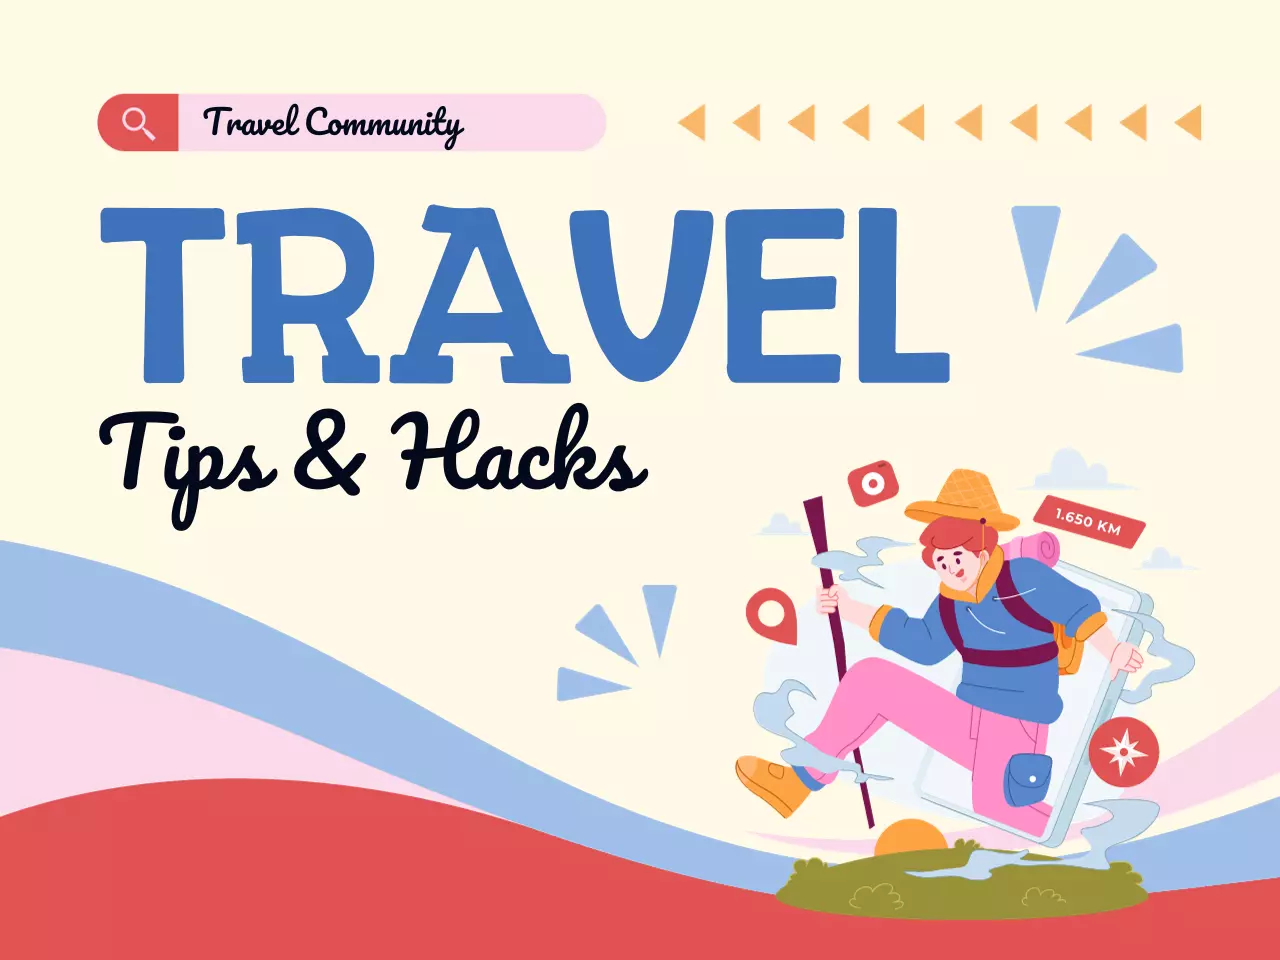 How to Find and Join Travel Communities